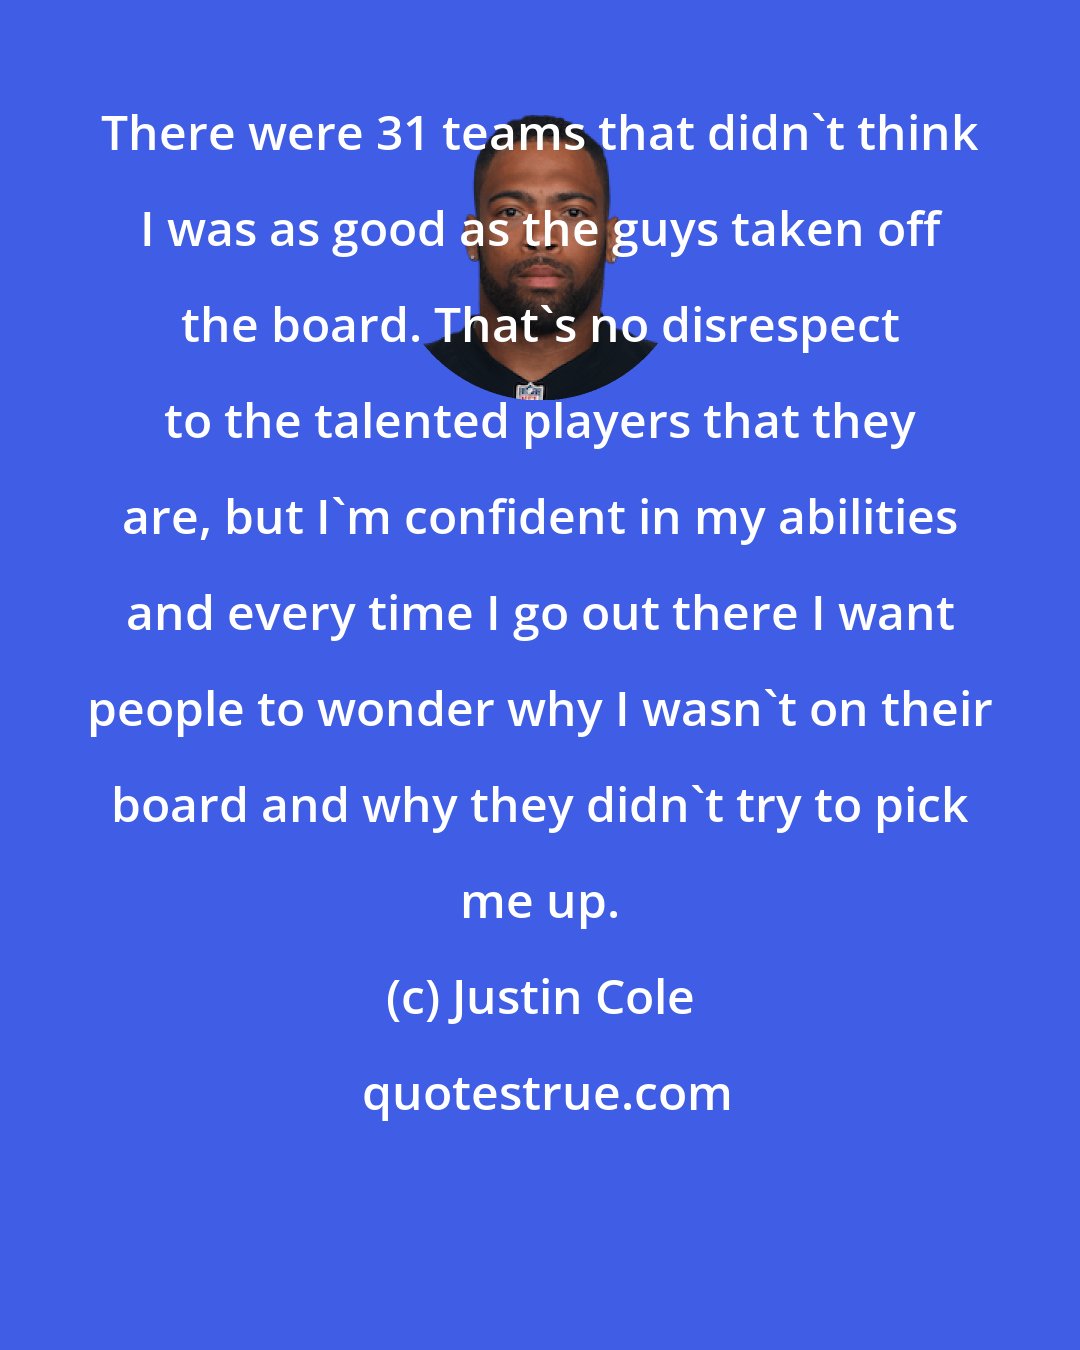 Justin Cole: There were 31 teams that didn't think I was as good as the guys taken off the board. That's no disrespect to the talented players that they are, but I'm confident in my abilities and every time I go out there I want people to wonder why I wasn't on their board and why they didn't try to pick me up.